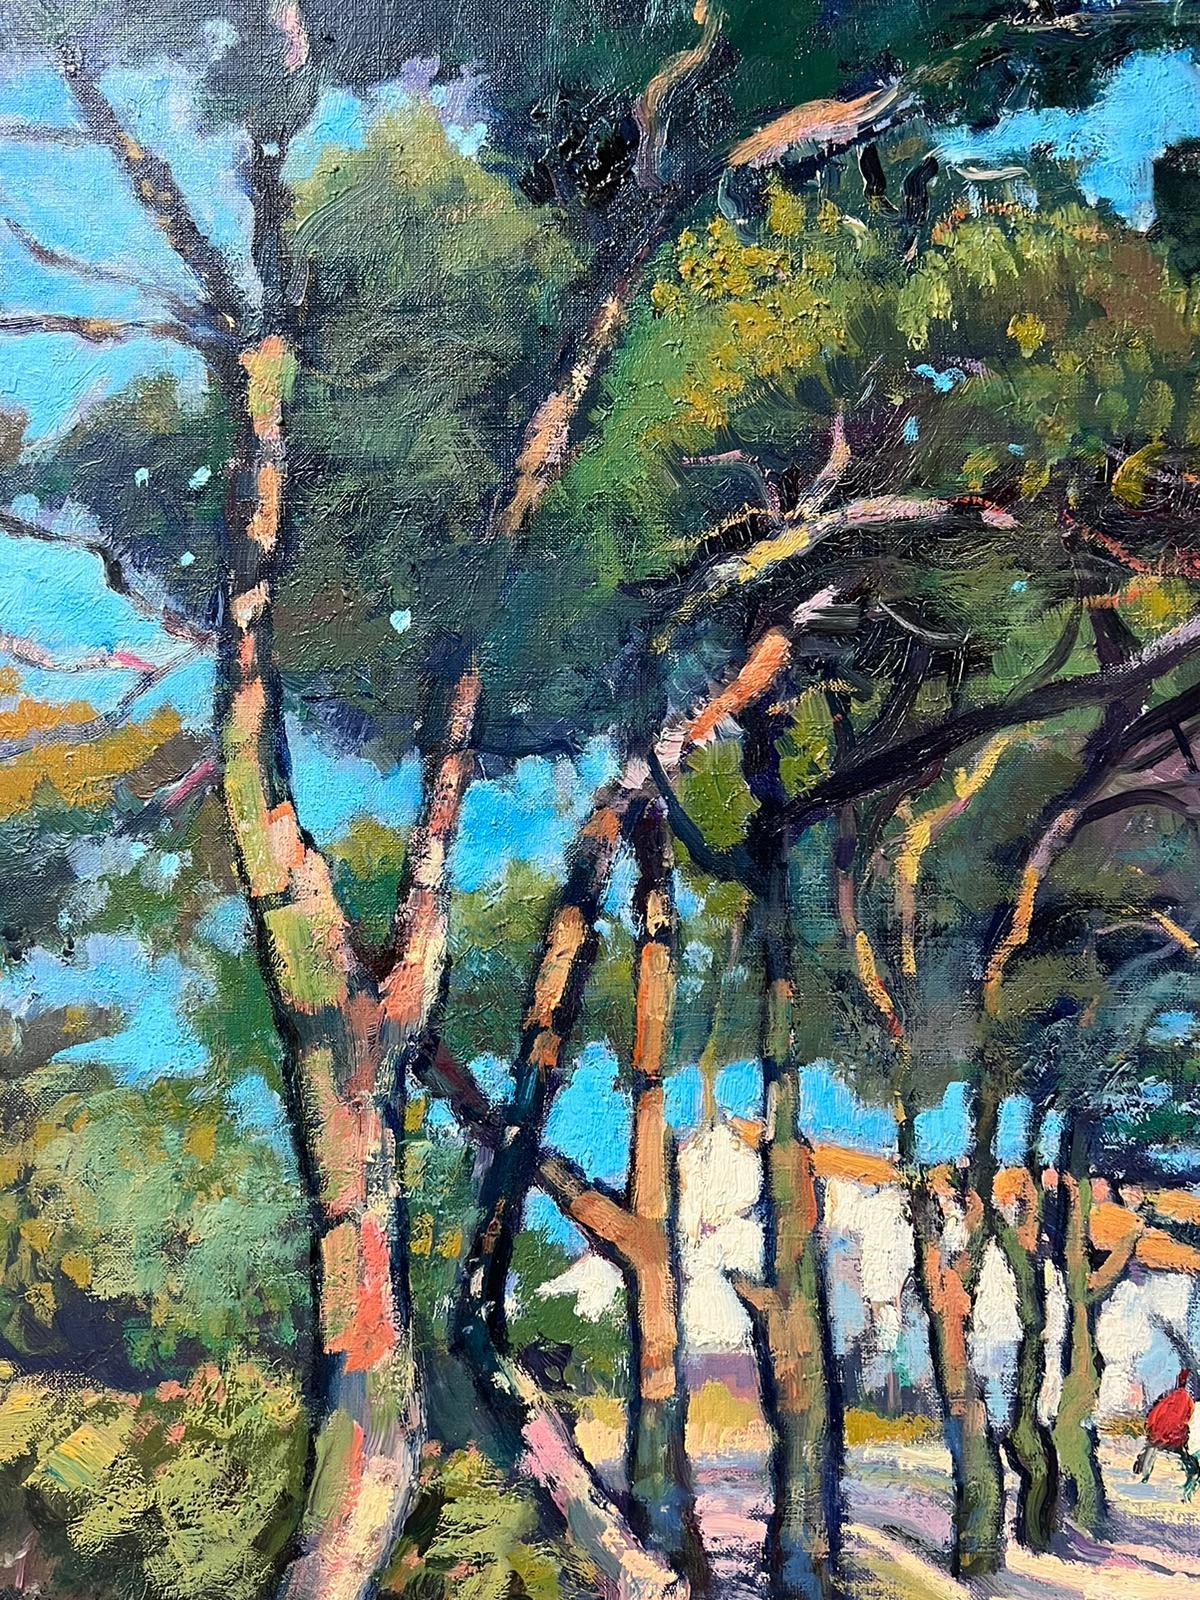 Southern France Summer Scorching Landscape Agde Post Impressionist French Oil  2